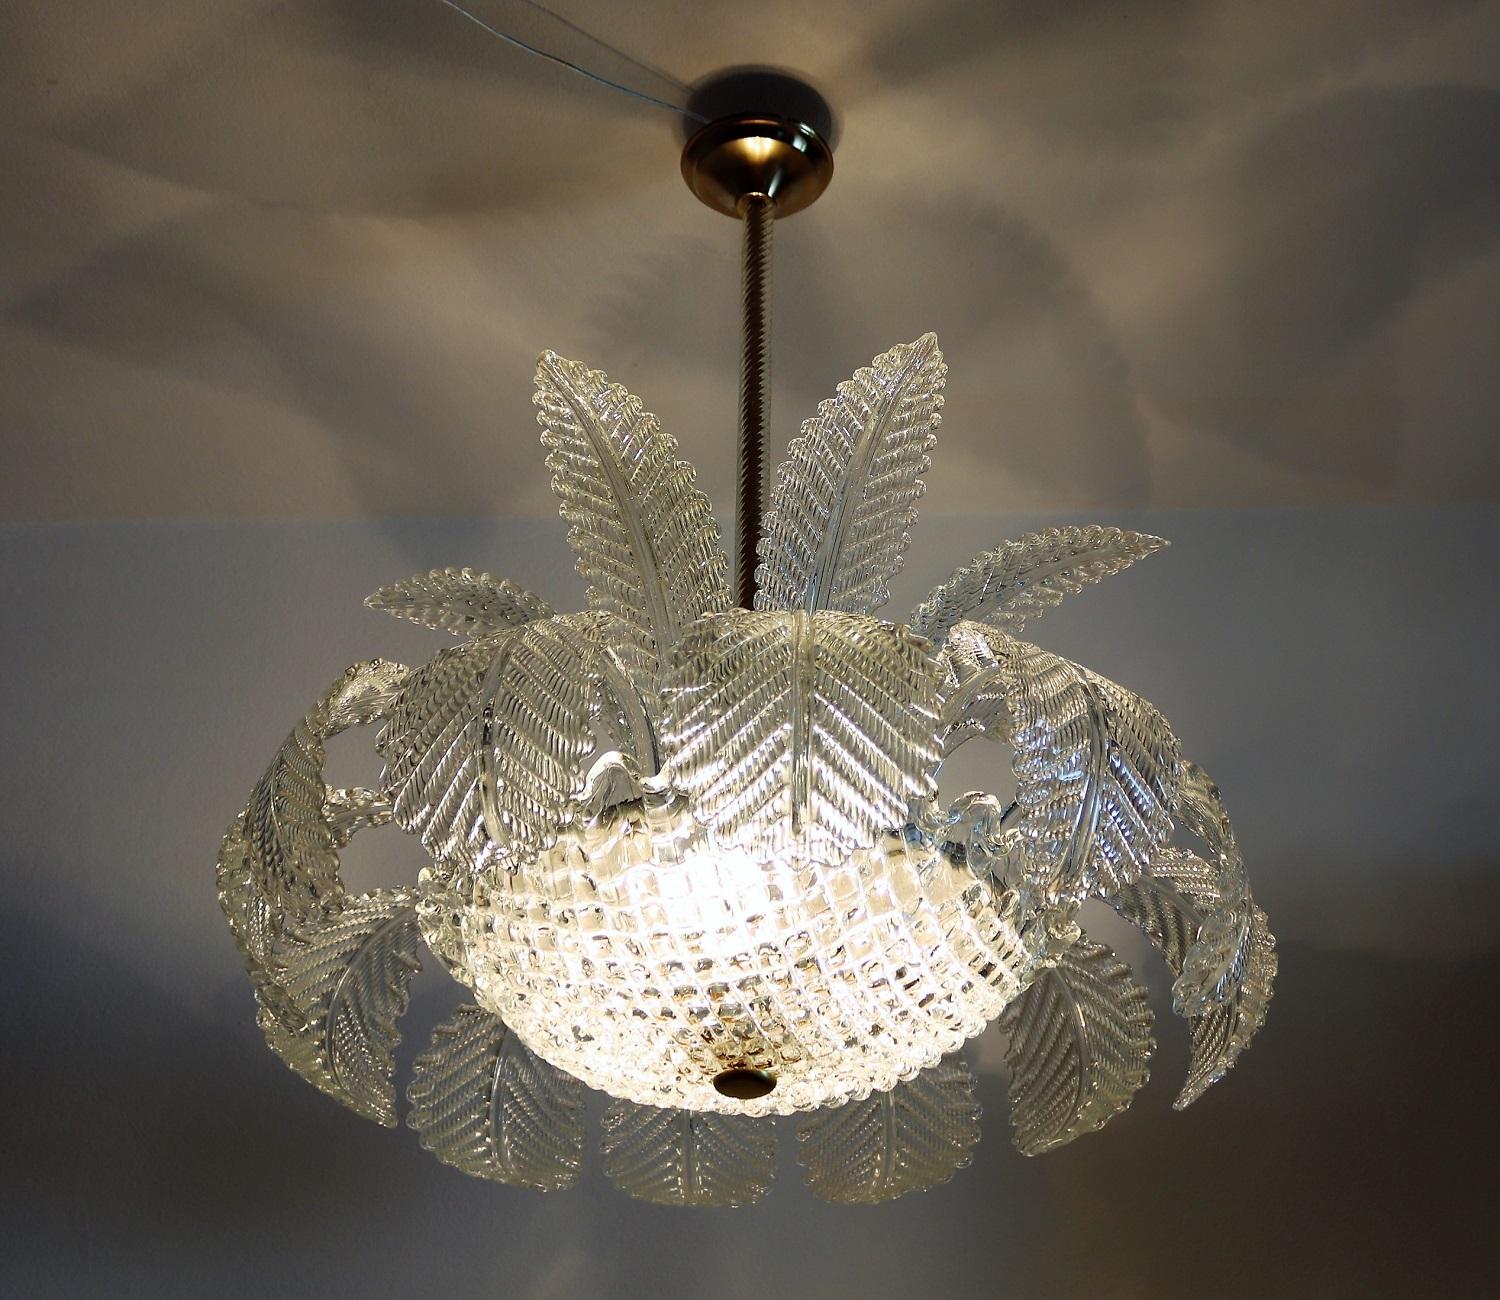 Magnificent big chandelier Made in Italy in the style of Barovier & Toso during the 1950s with handmade transparent glasses. Leaves beautiful shadows on wall and ceiling!!
All parts are original.
The glass basket holds a wooden support with 18